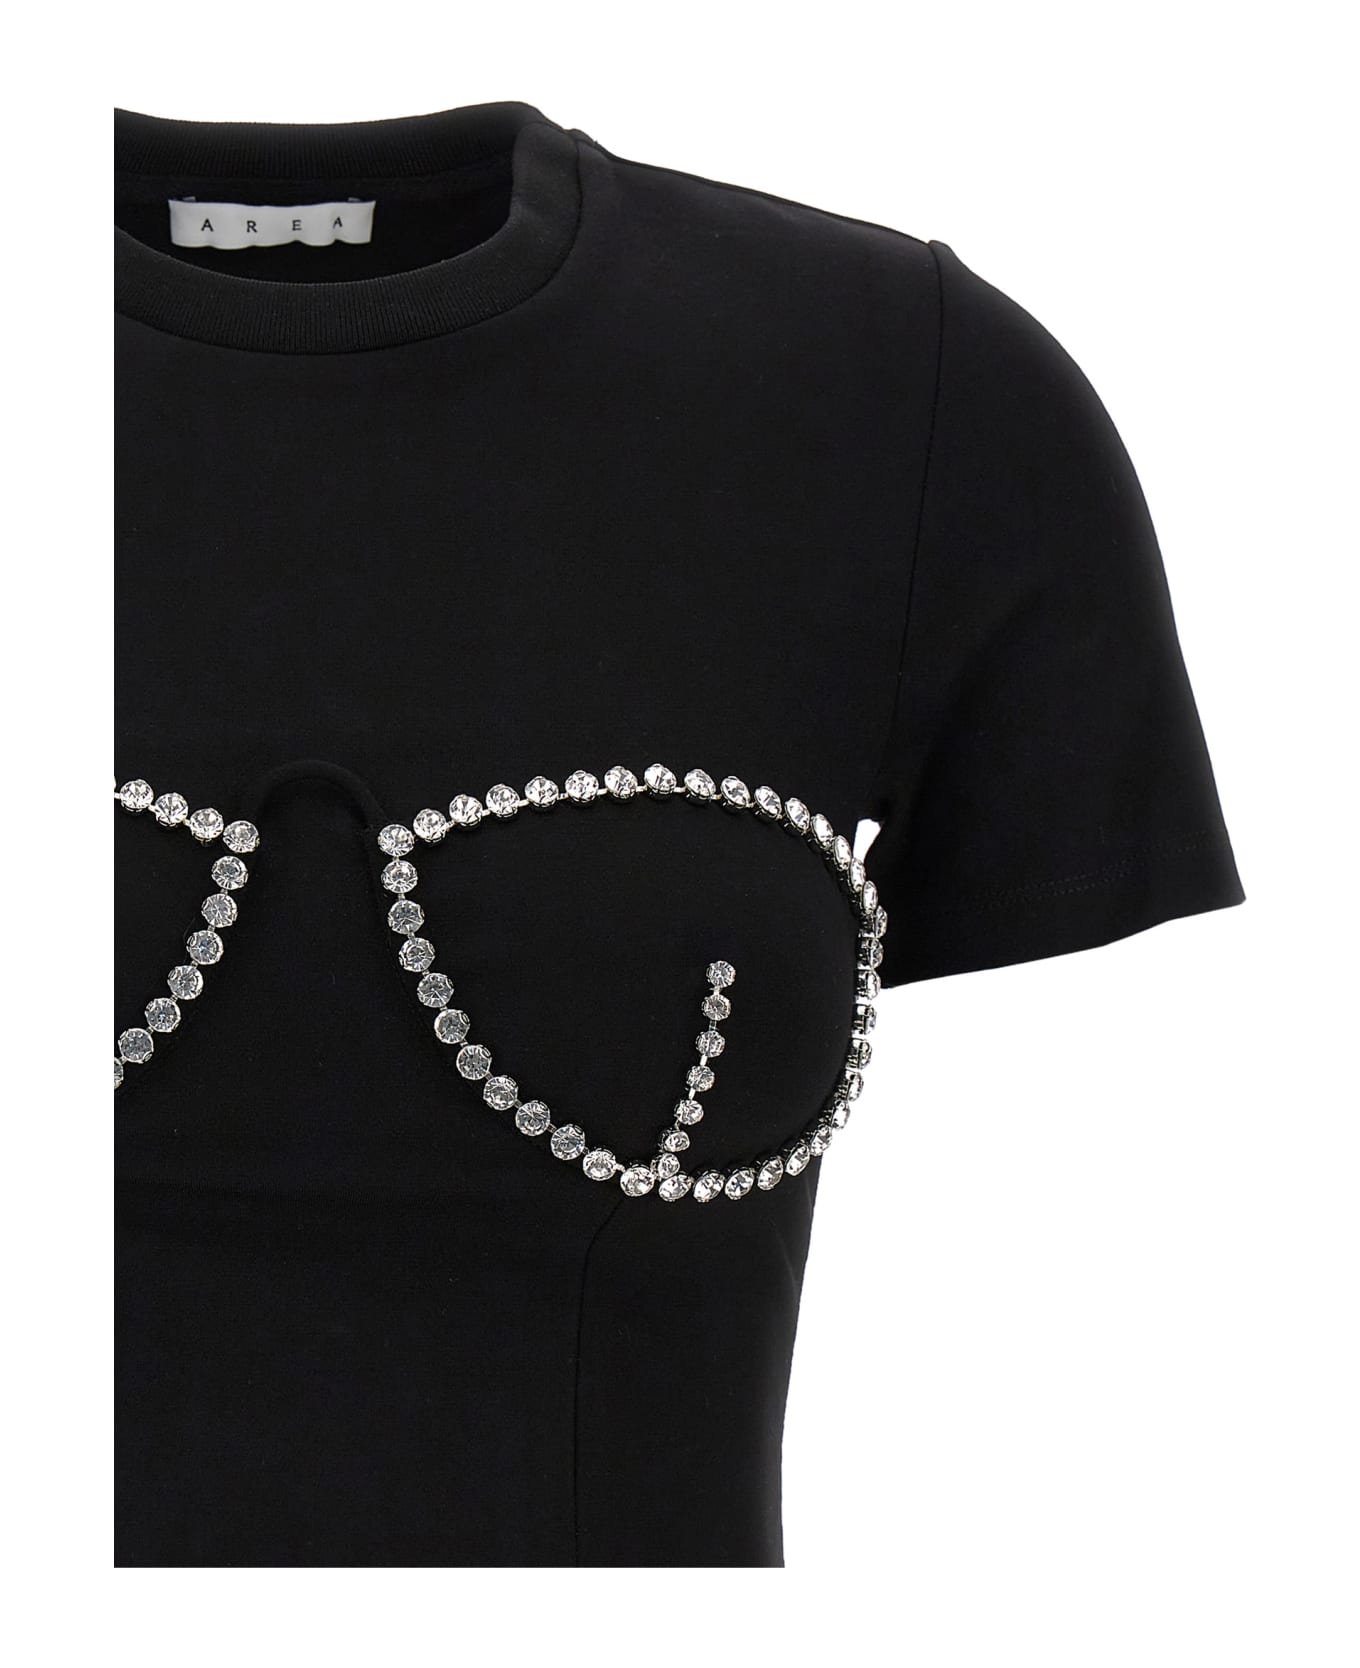 AREA T-shirt 'crystal Bustier Cup' - Black Tシャツ